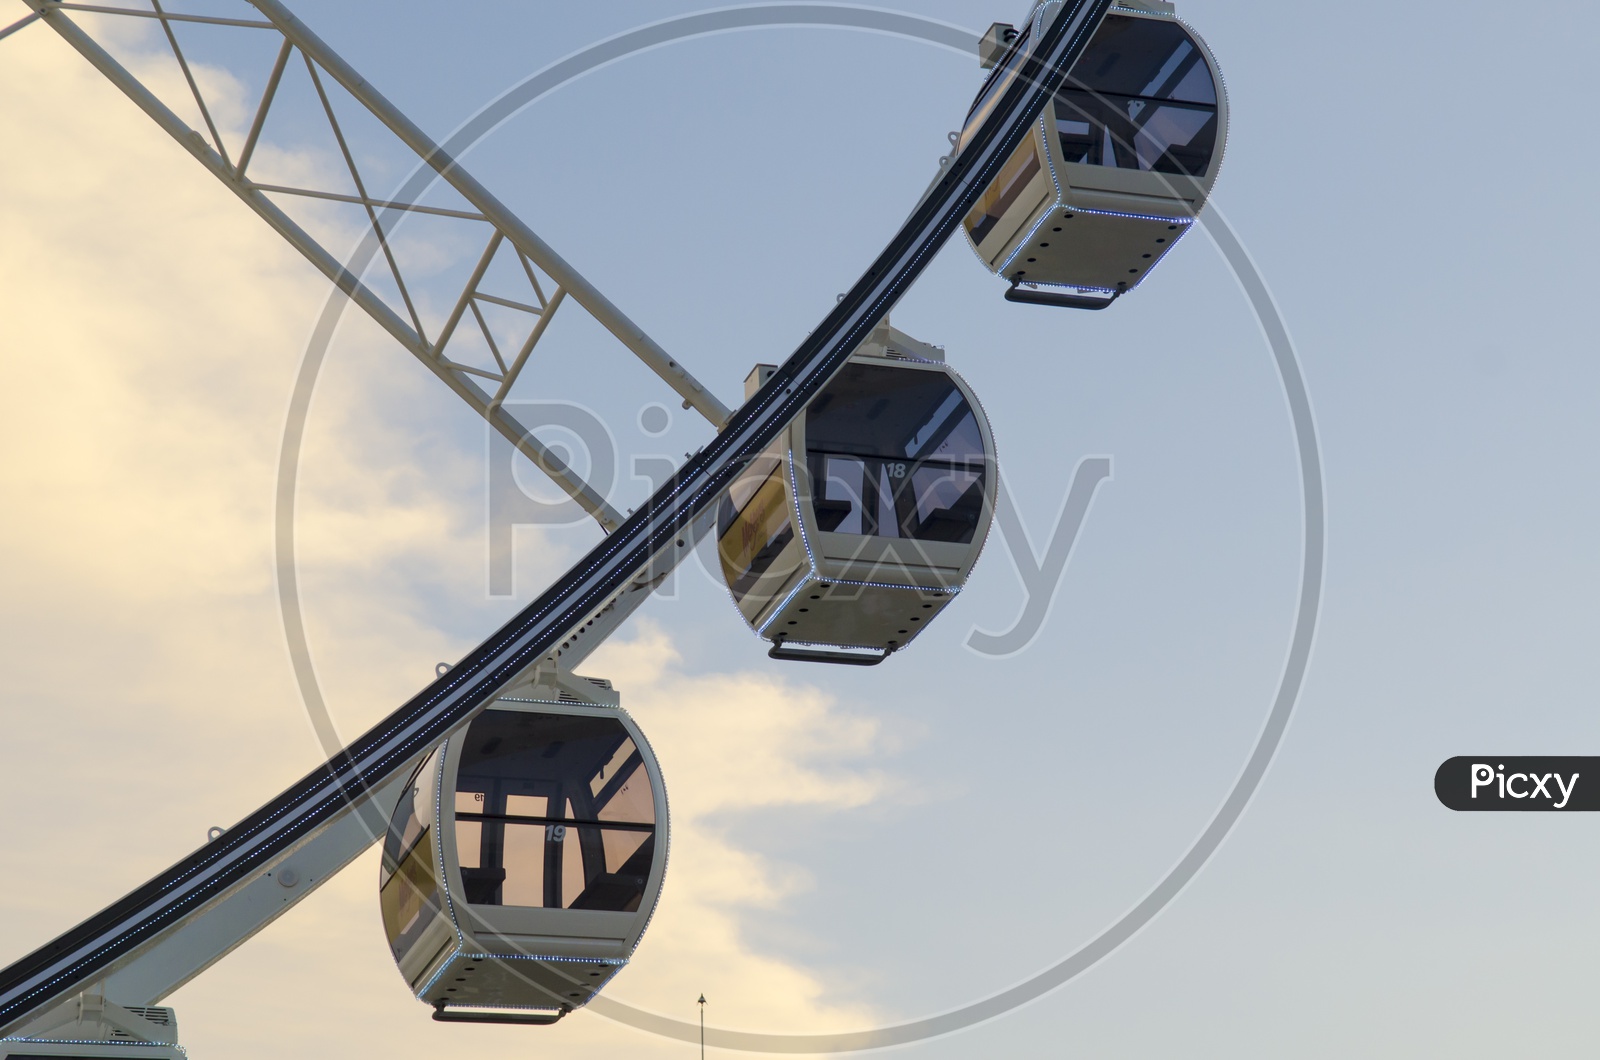 Beautiful large Ferris wheel With Passenger Cars or Cabin Or Capsules